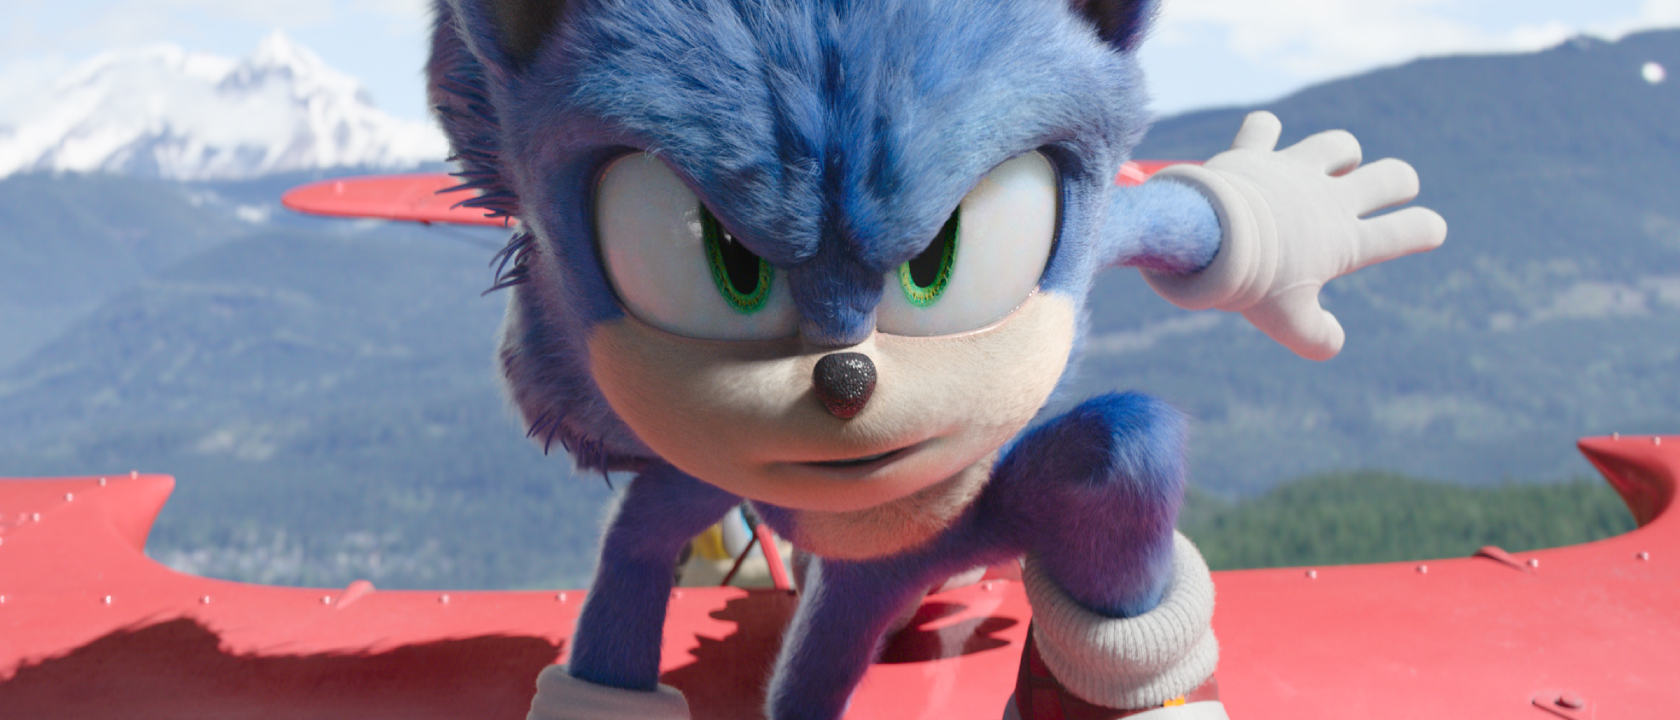 The terrifying version of Sonic the Hedgehog is now a toy